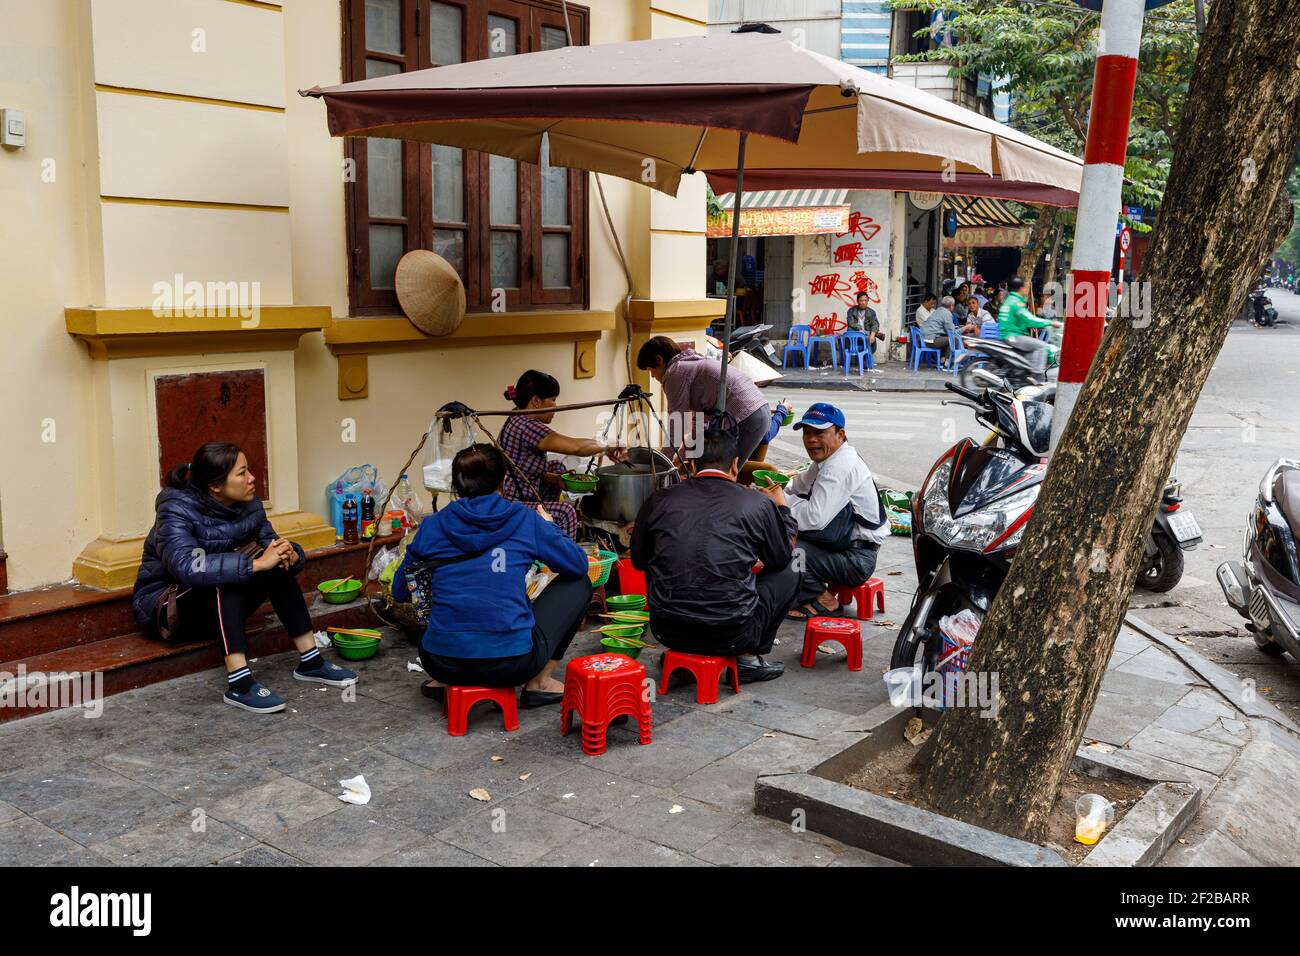 The lifestyle and city life of Hanoi in Vietnam Stock Photo